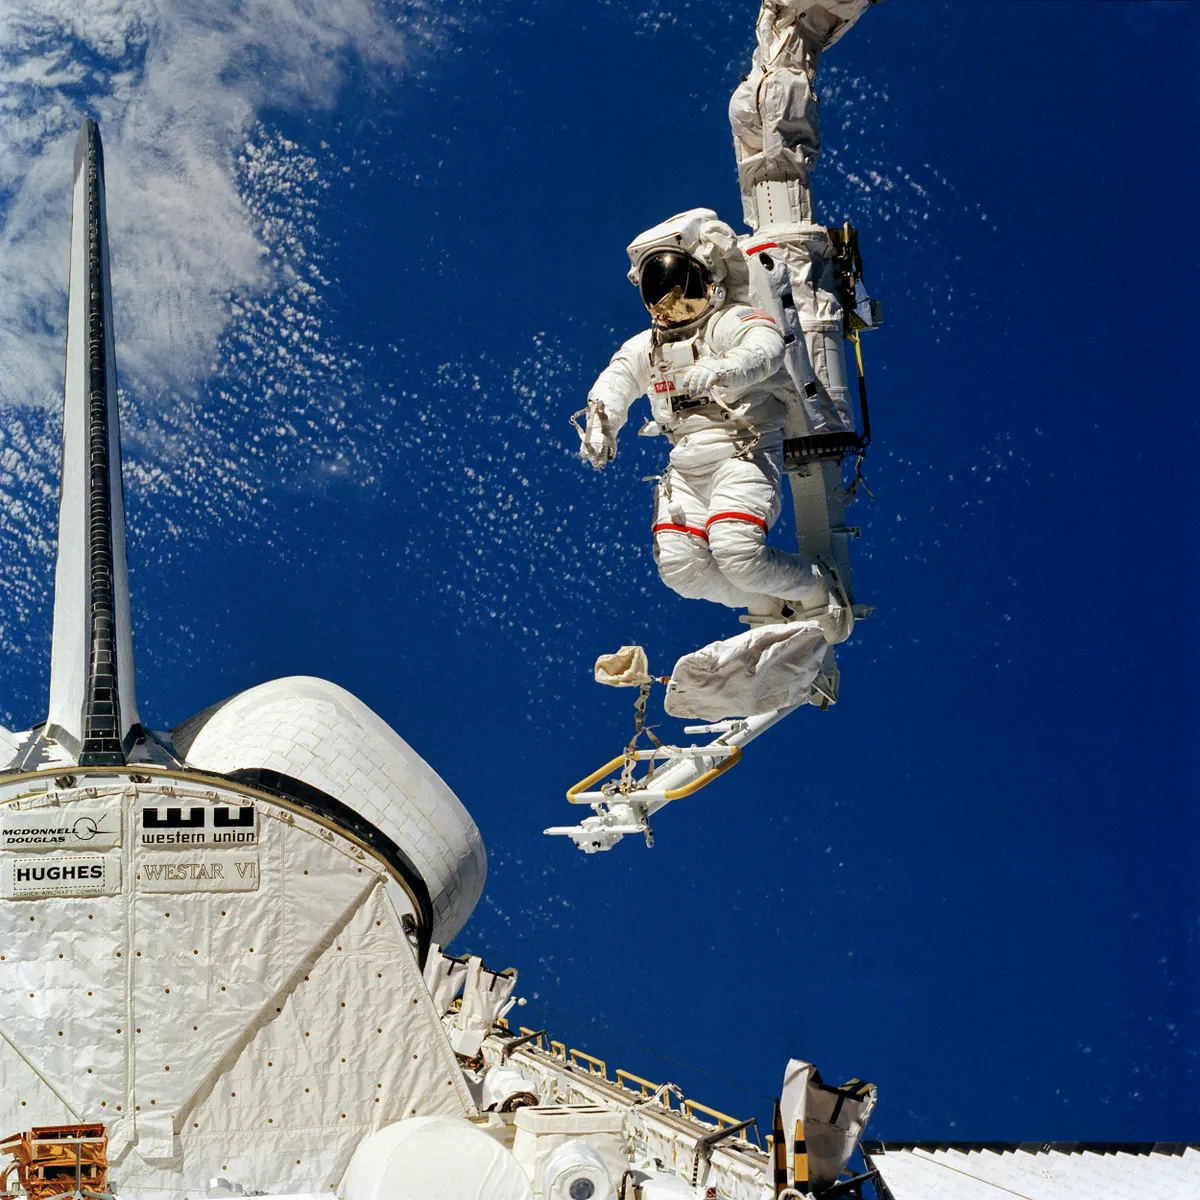 Bruce McCandless spacewalks during a test of the new mobile foot restraint, 7 February 1984. Credit: NASA